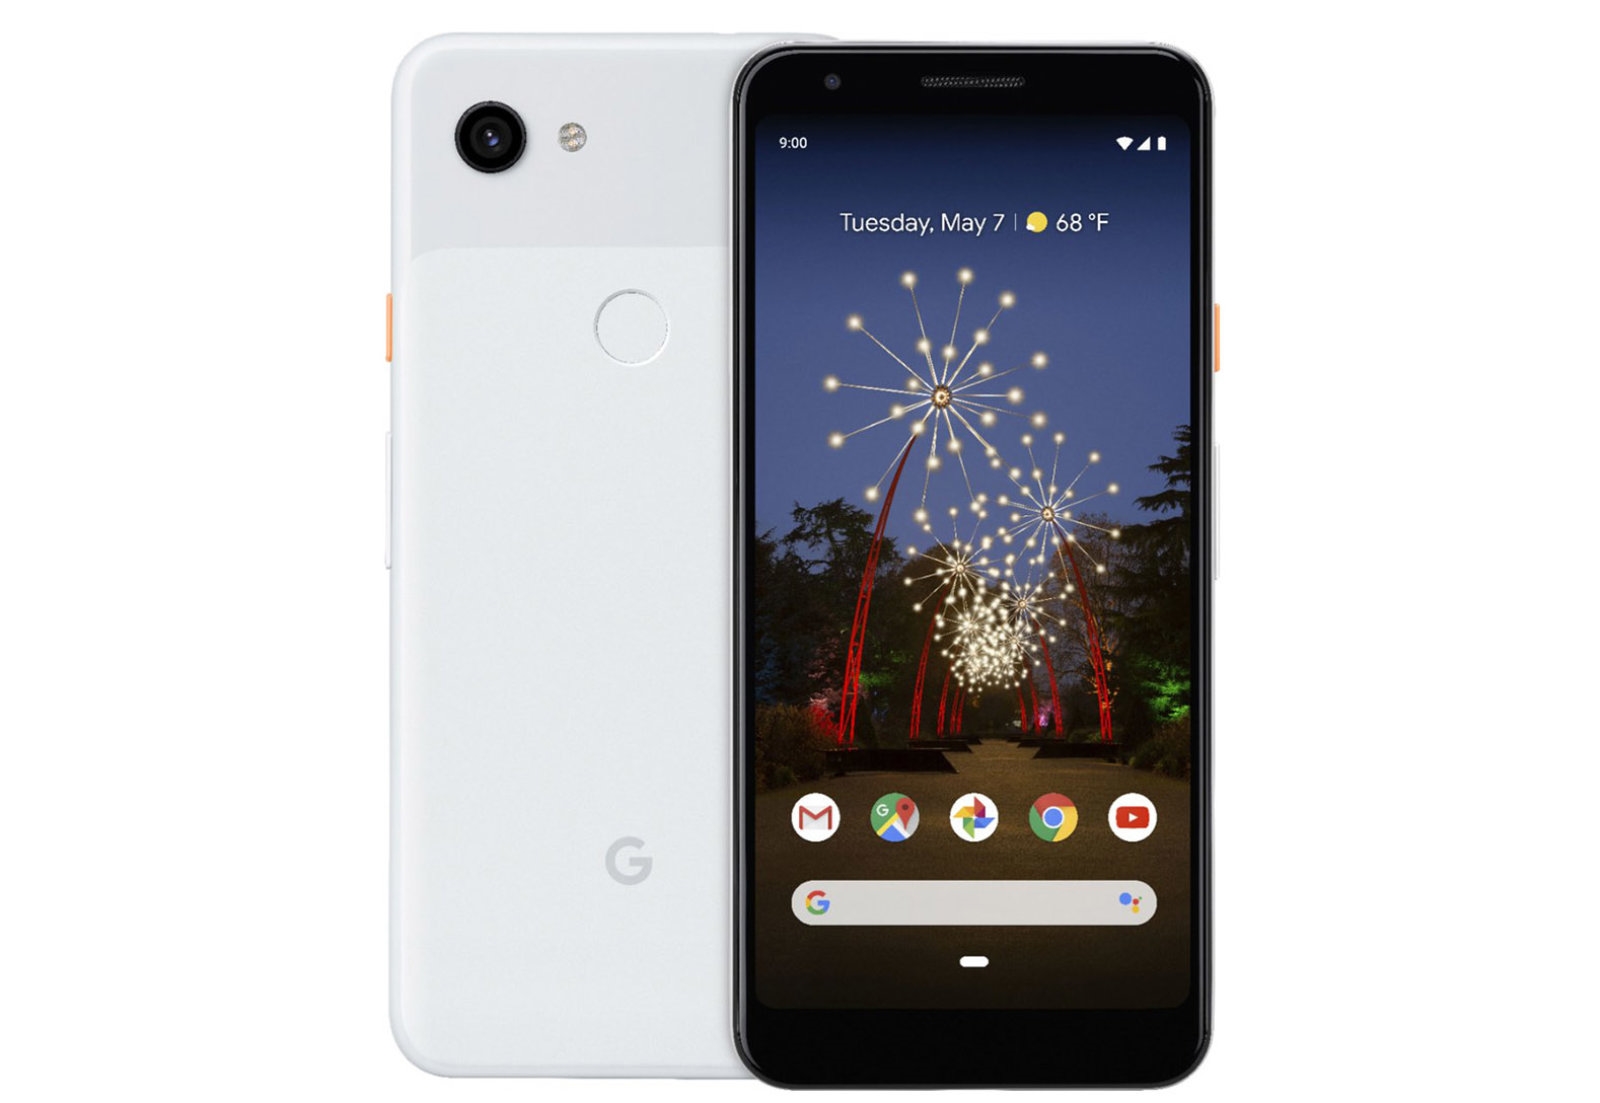 Google Pixel 3a XL spotted at Best Buy ahead of launch | DeviceDaily.com